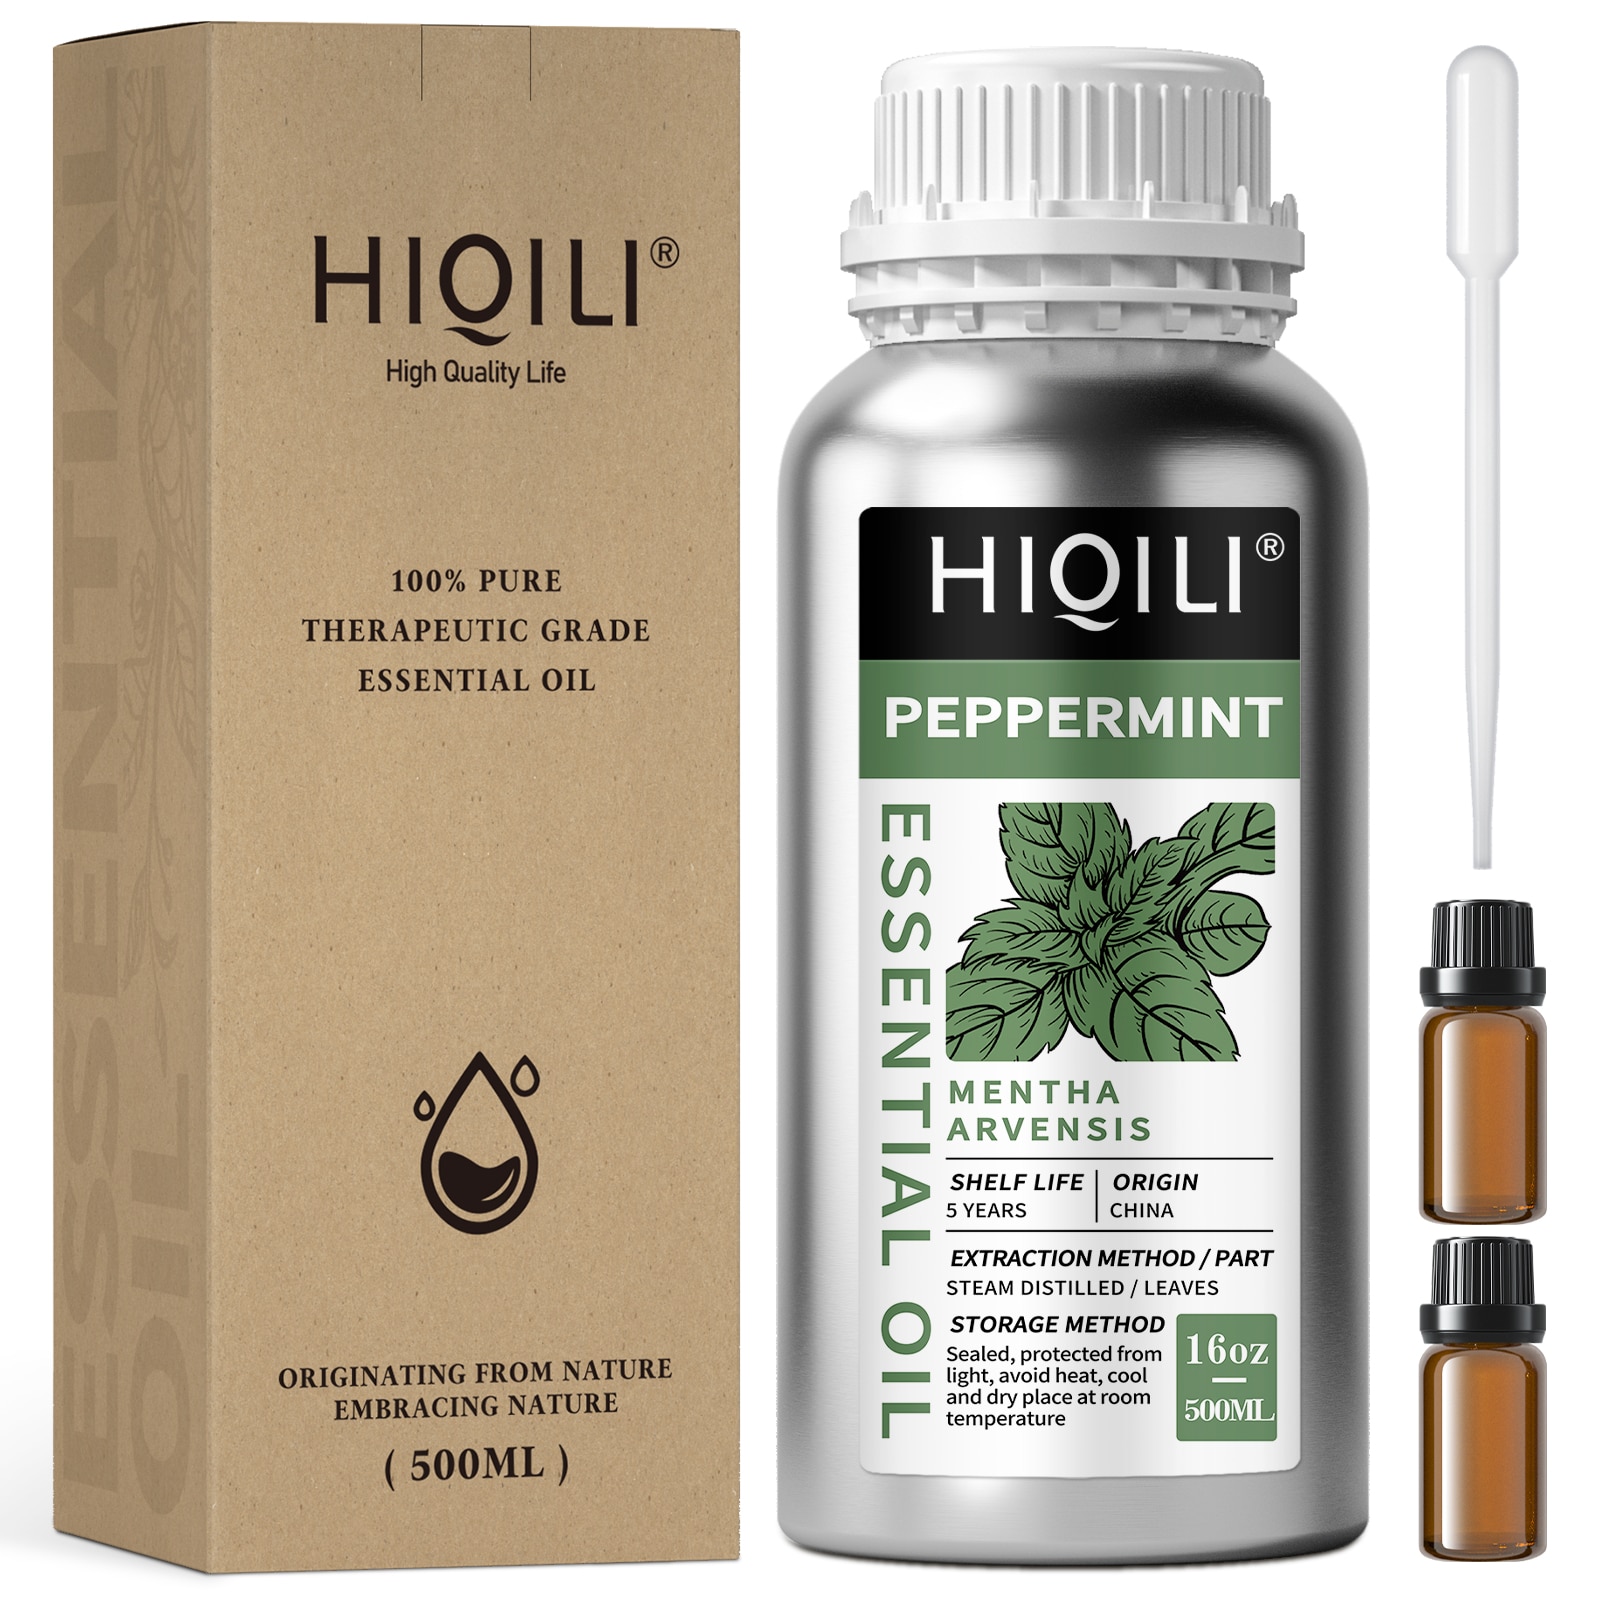 HIQILI 500ML Peppermint Essential Oils,100% Pure Nature for Aromatherapy | Used for Diffuser，Humidifier，Massage | Refreshing